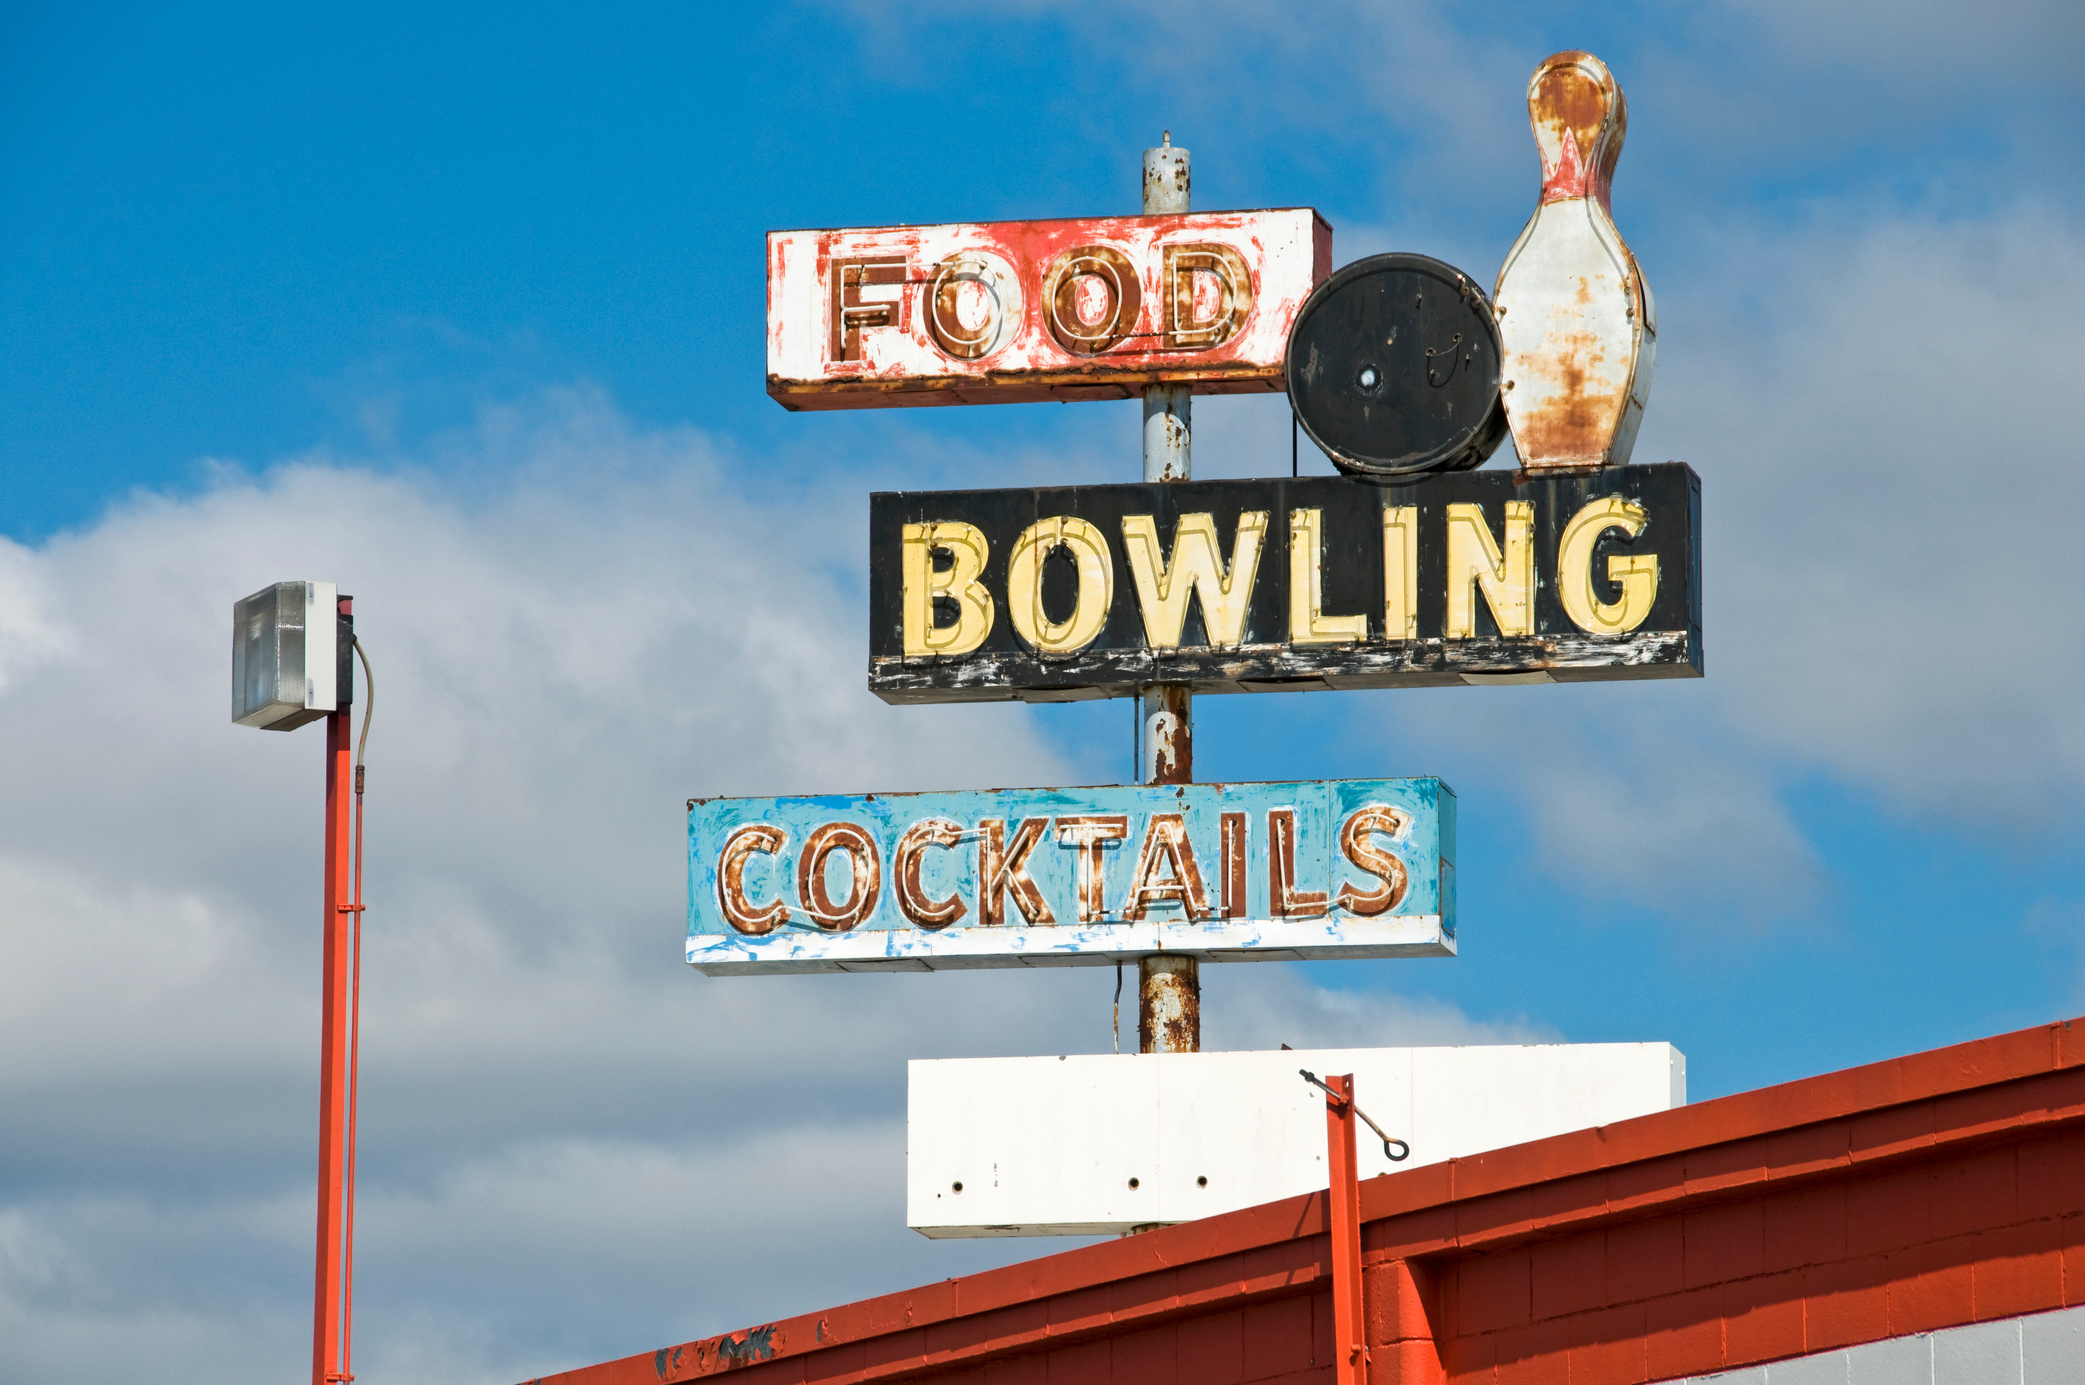 Old bowling alley sign on condemned building